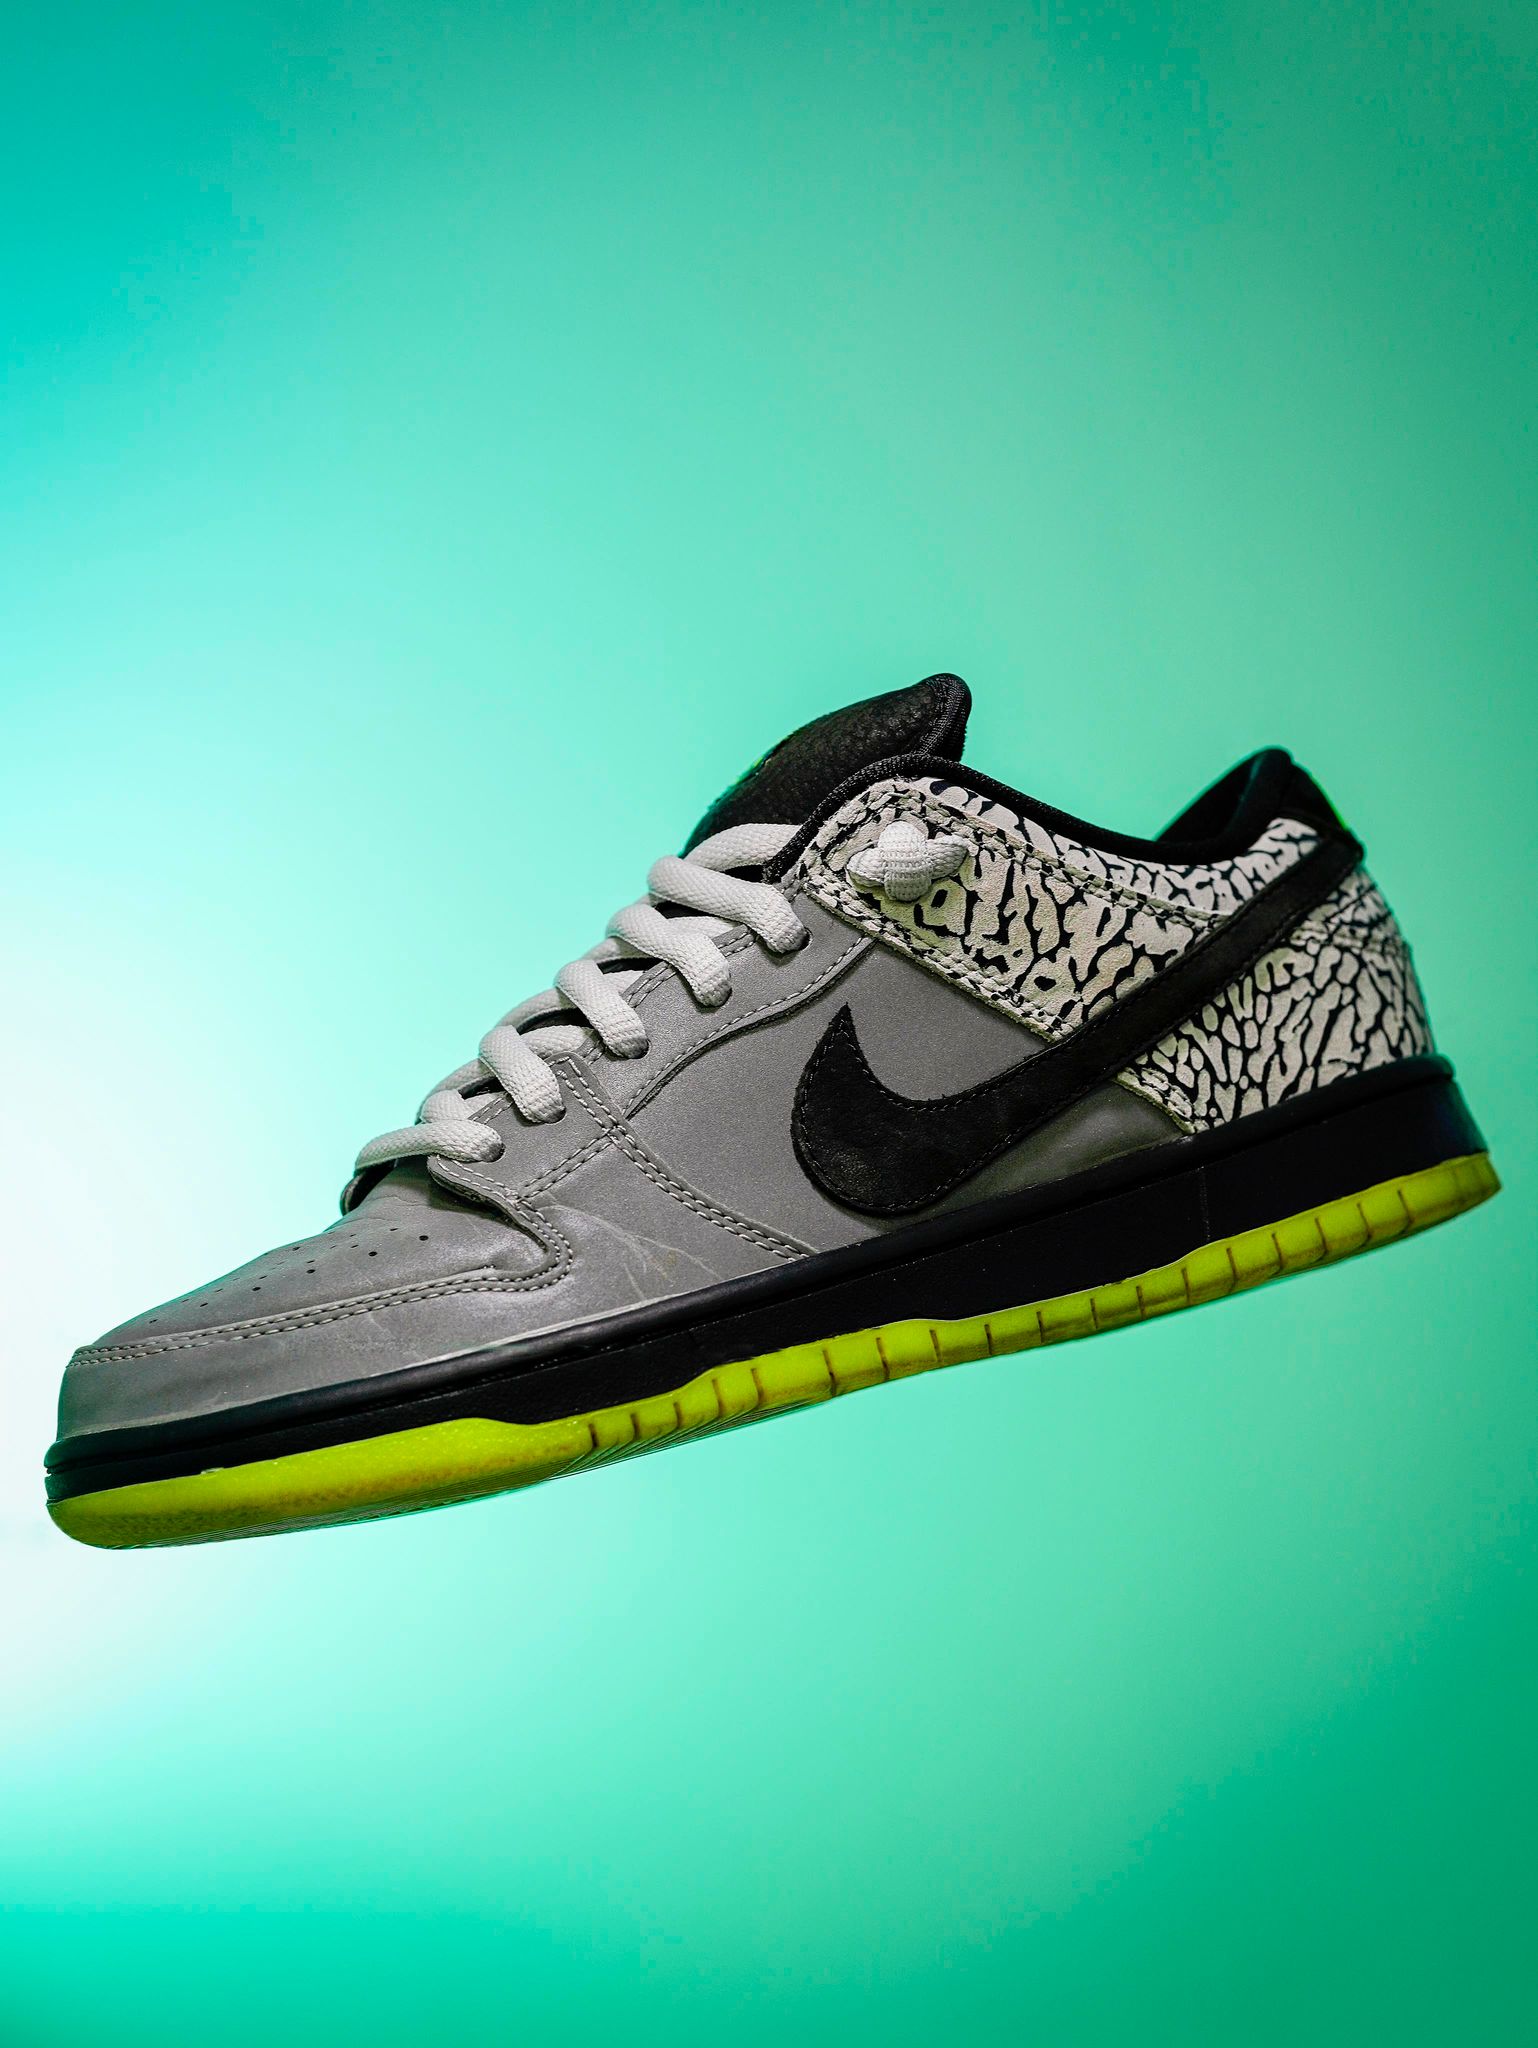 SB Dunk Thick Oval Laces - Light Grey